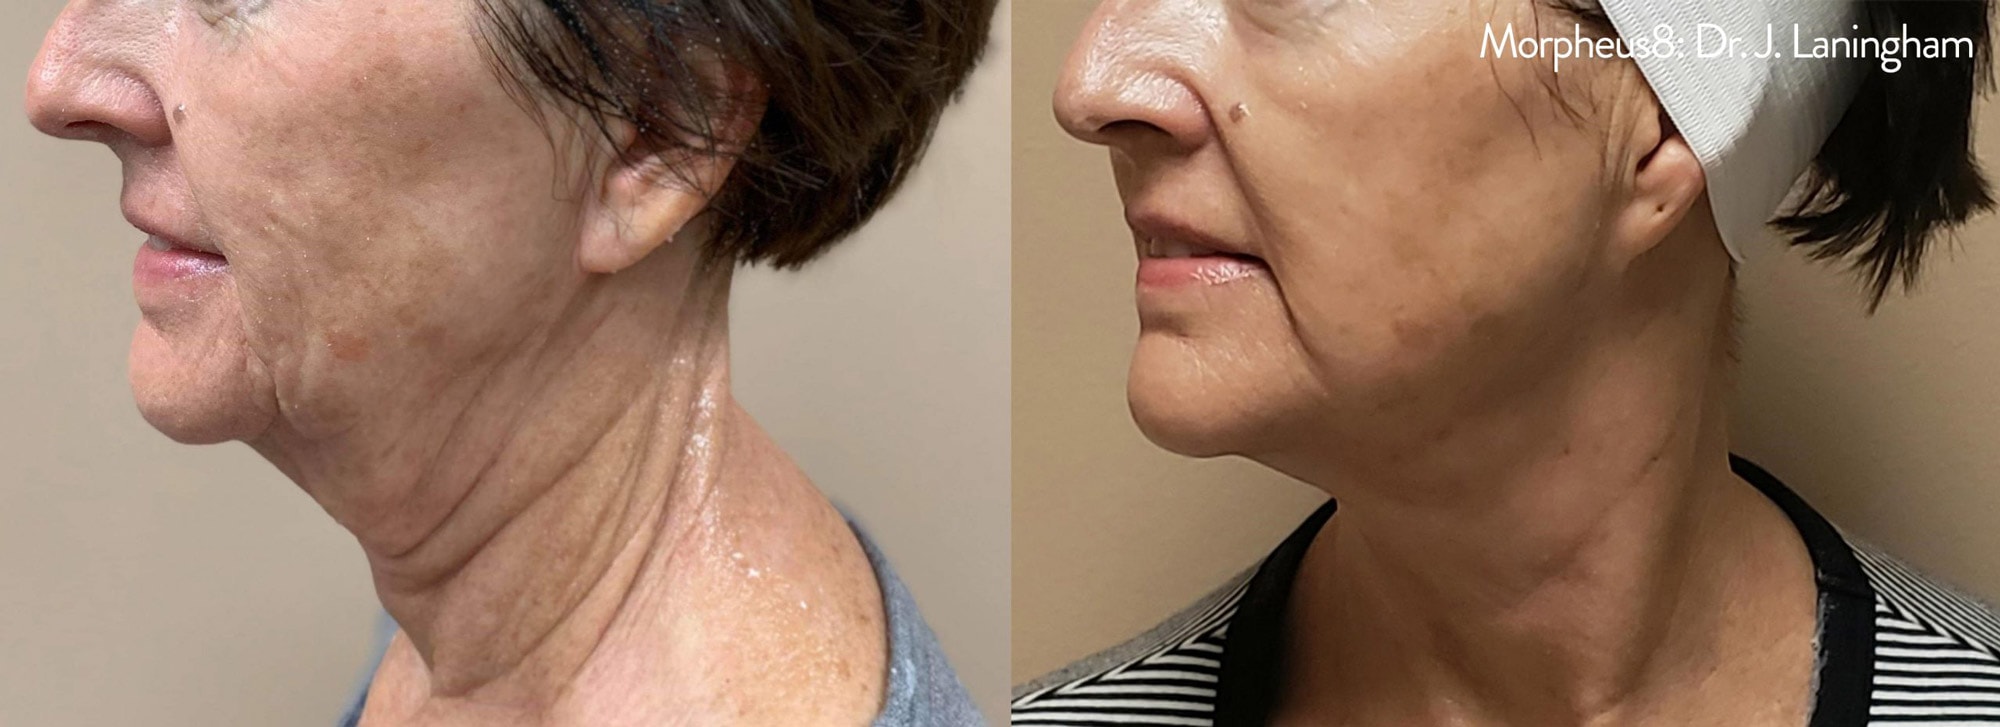 Before and After photos of Morpheus8 tightening loose skin, eliminating deep wrinkles and improving contour on a woman’s neck